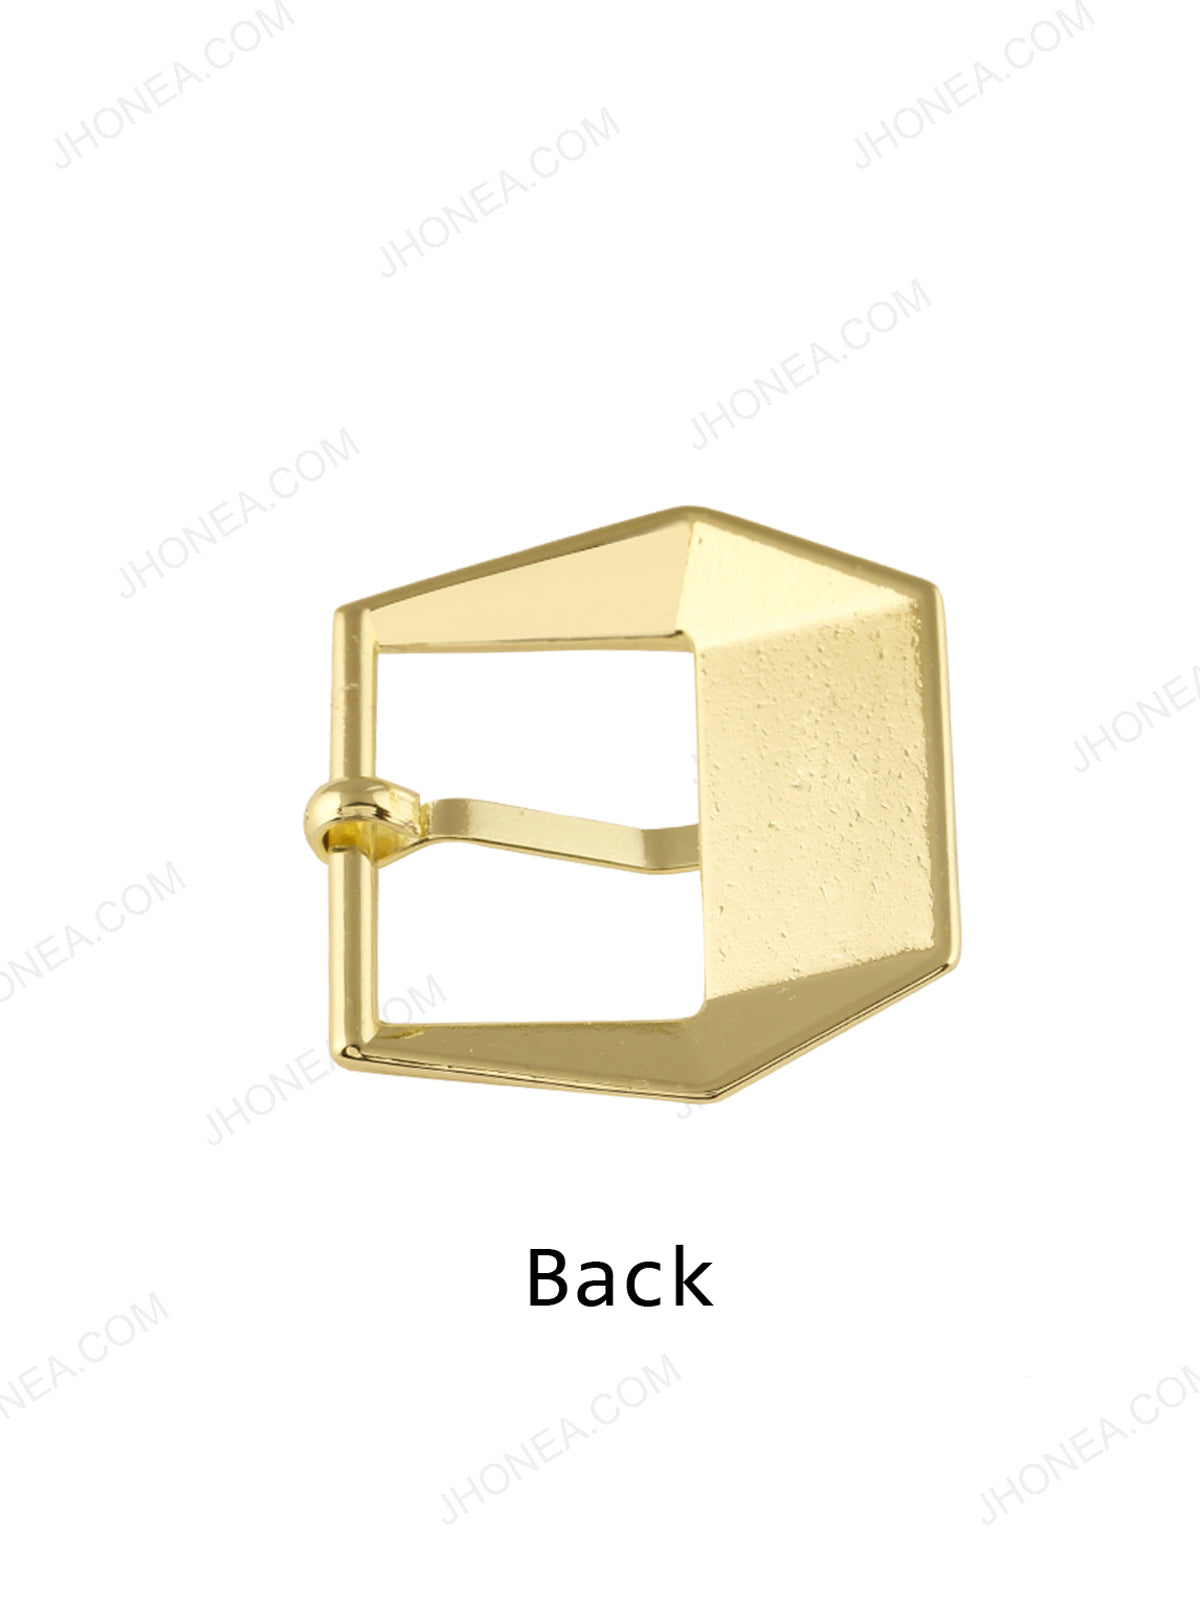 Shiny Bright Gold Western Style 3D Design Belt Buckle